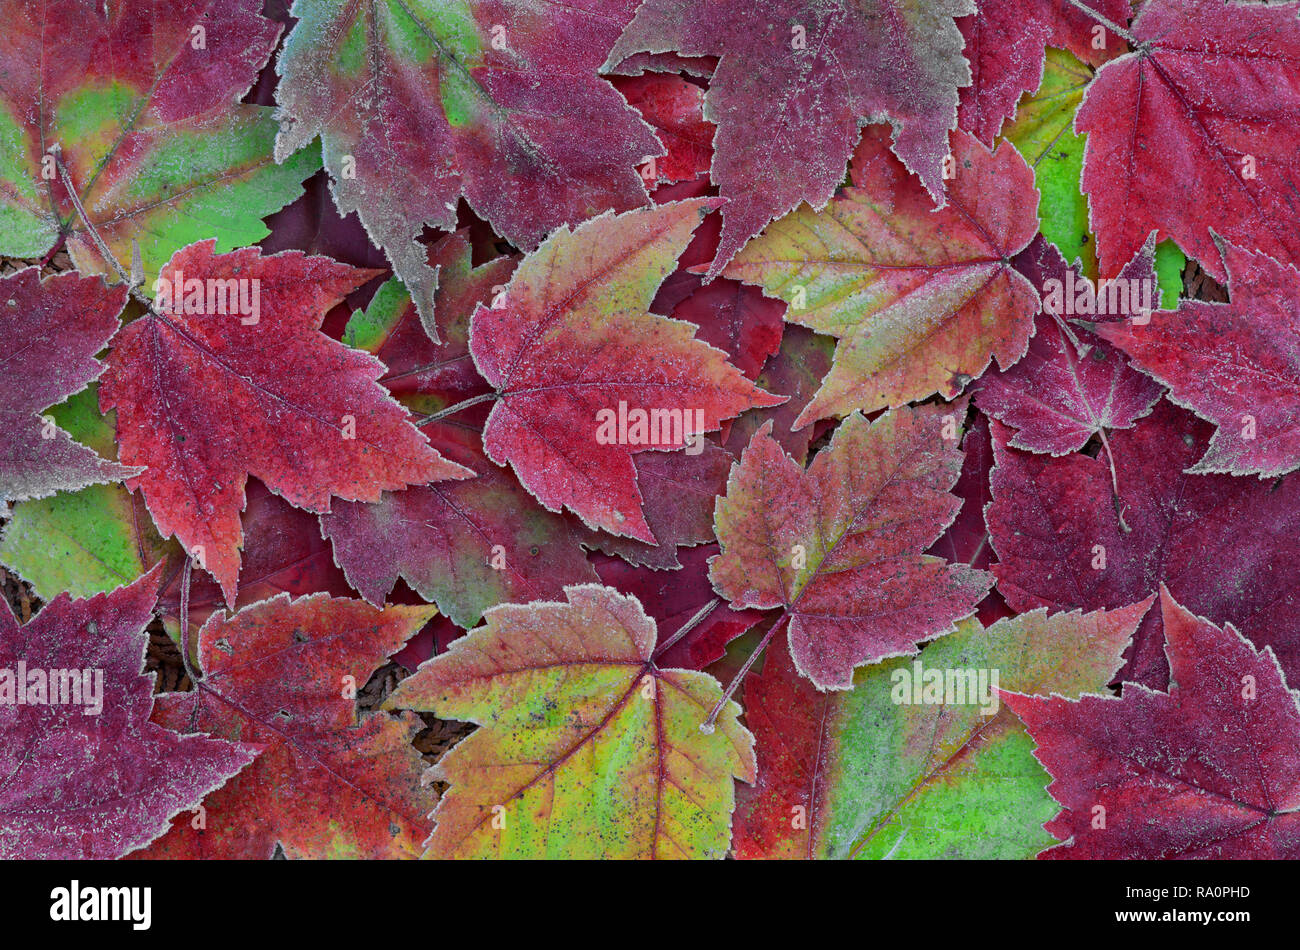 Frosted Maple leaves, forest floor, Autumn, E USA, by Skip Moody/Dembinsky Photo Assoc Stock Photo